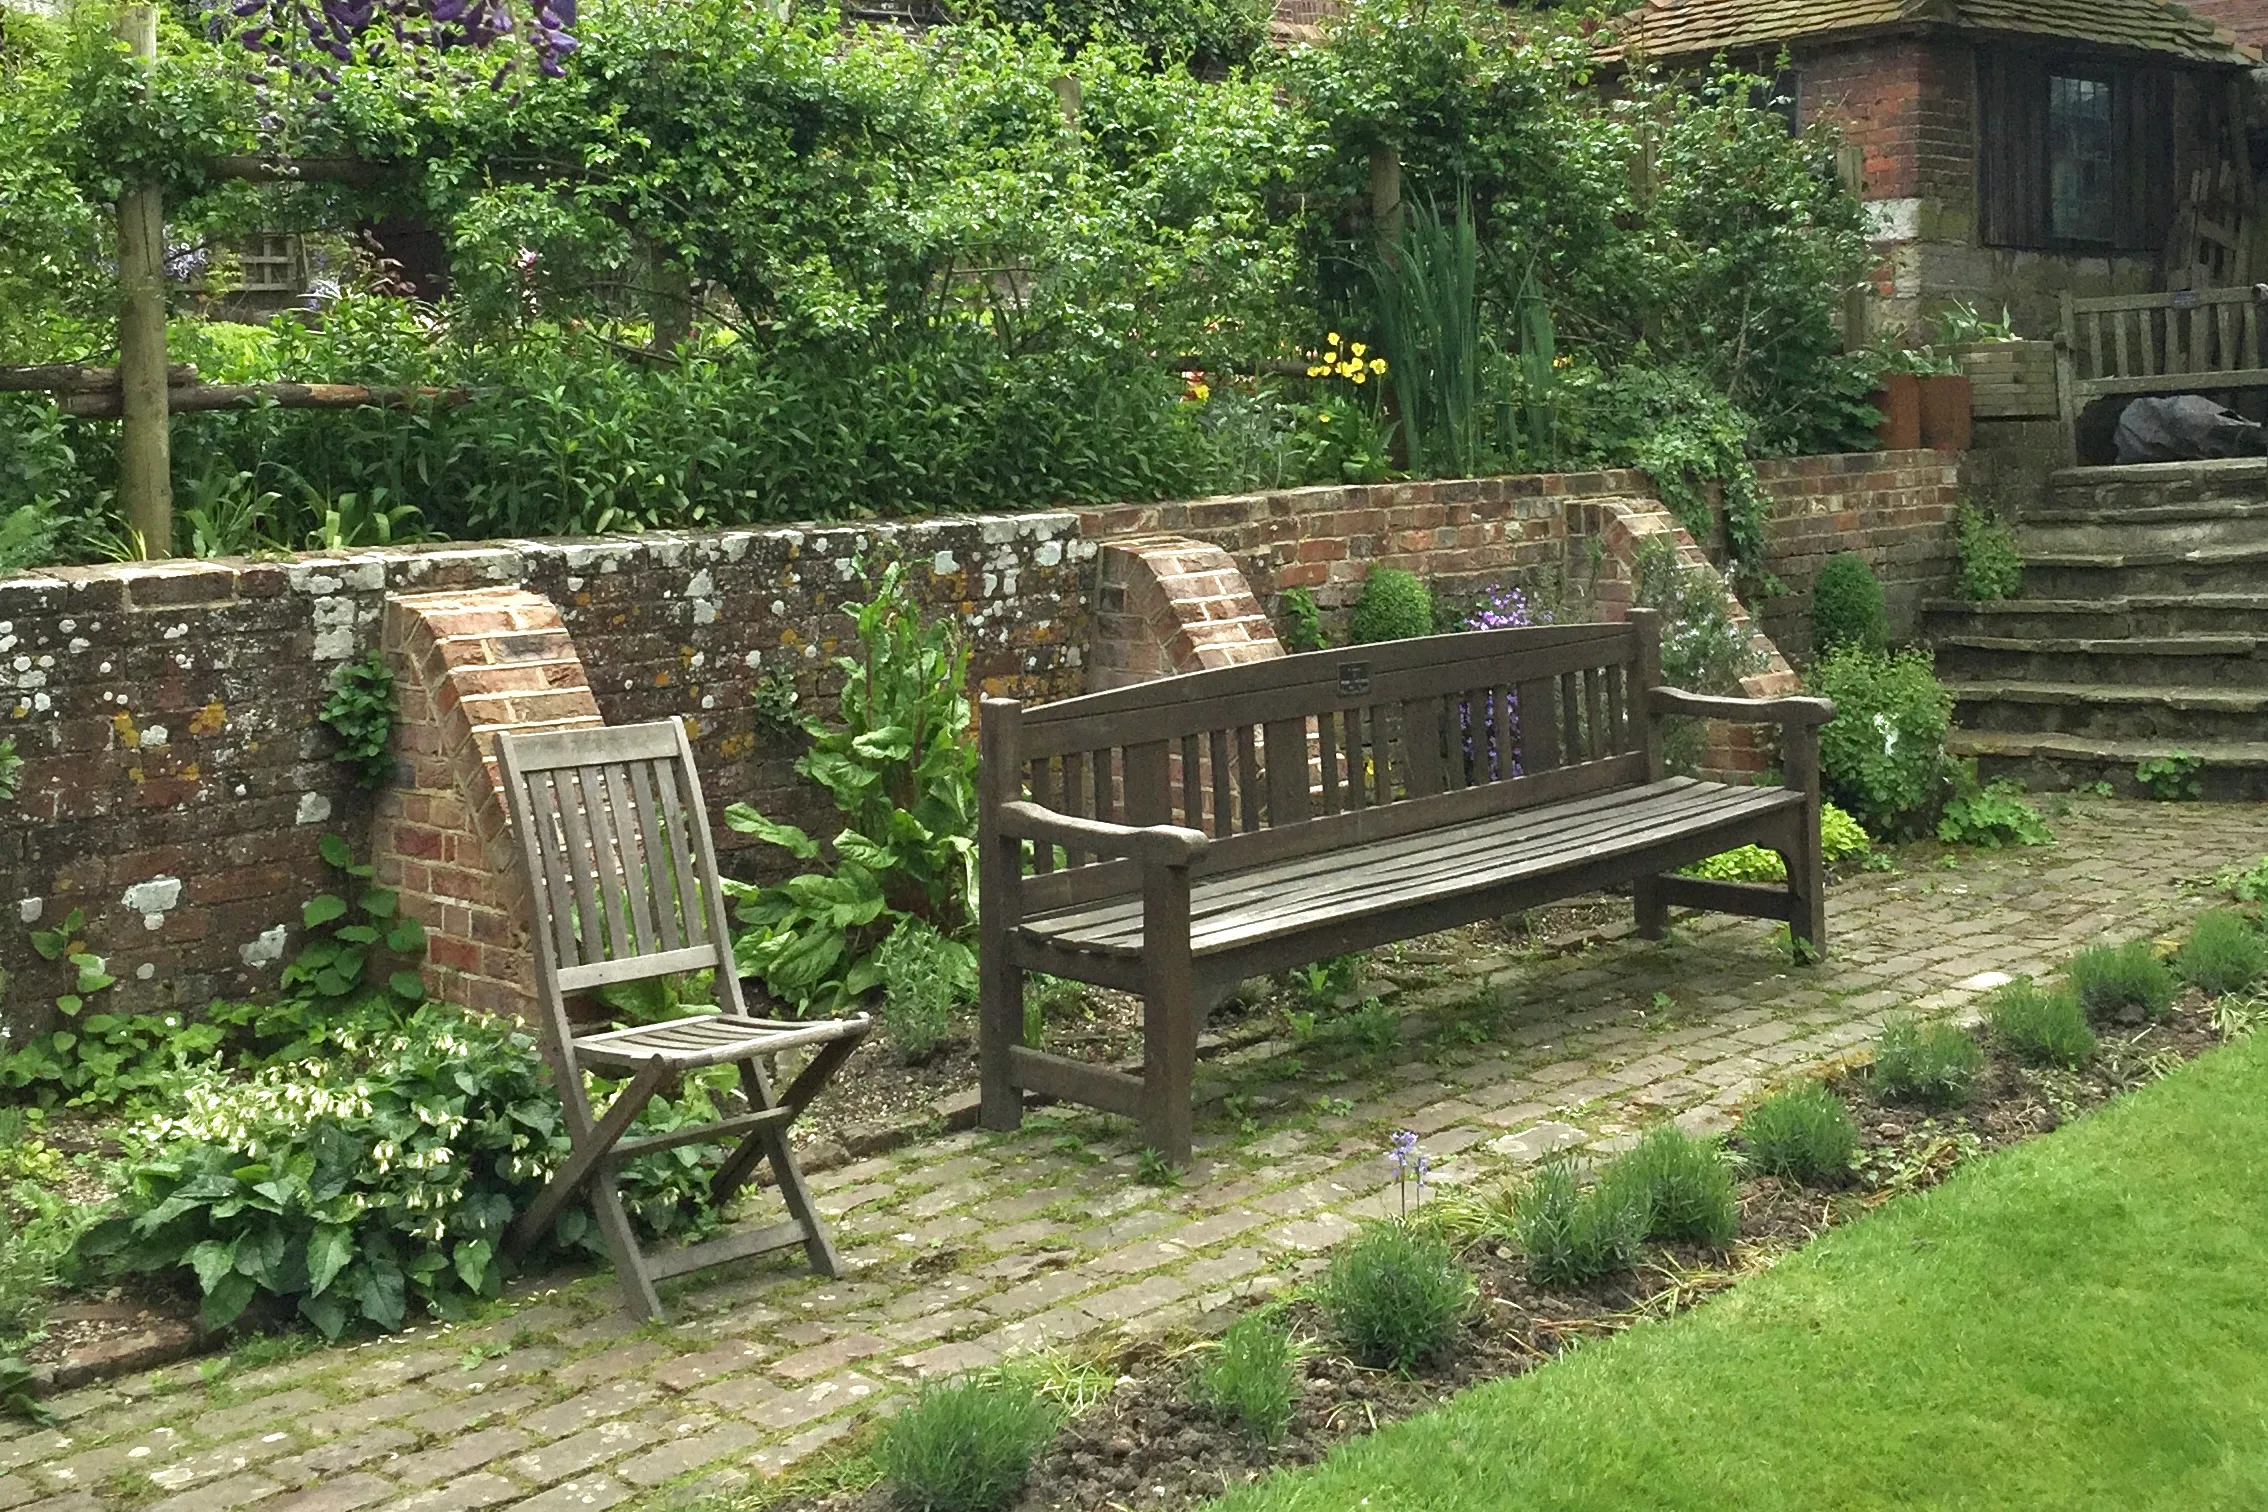 A walled garden with flowers and wooden seating